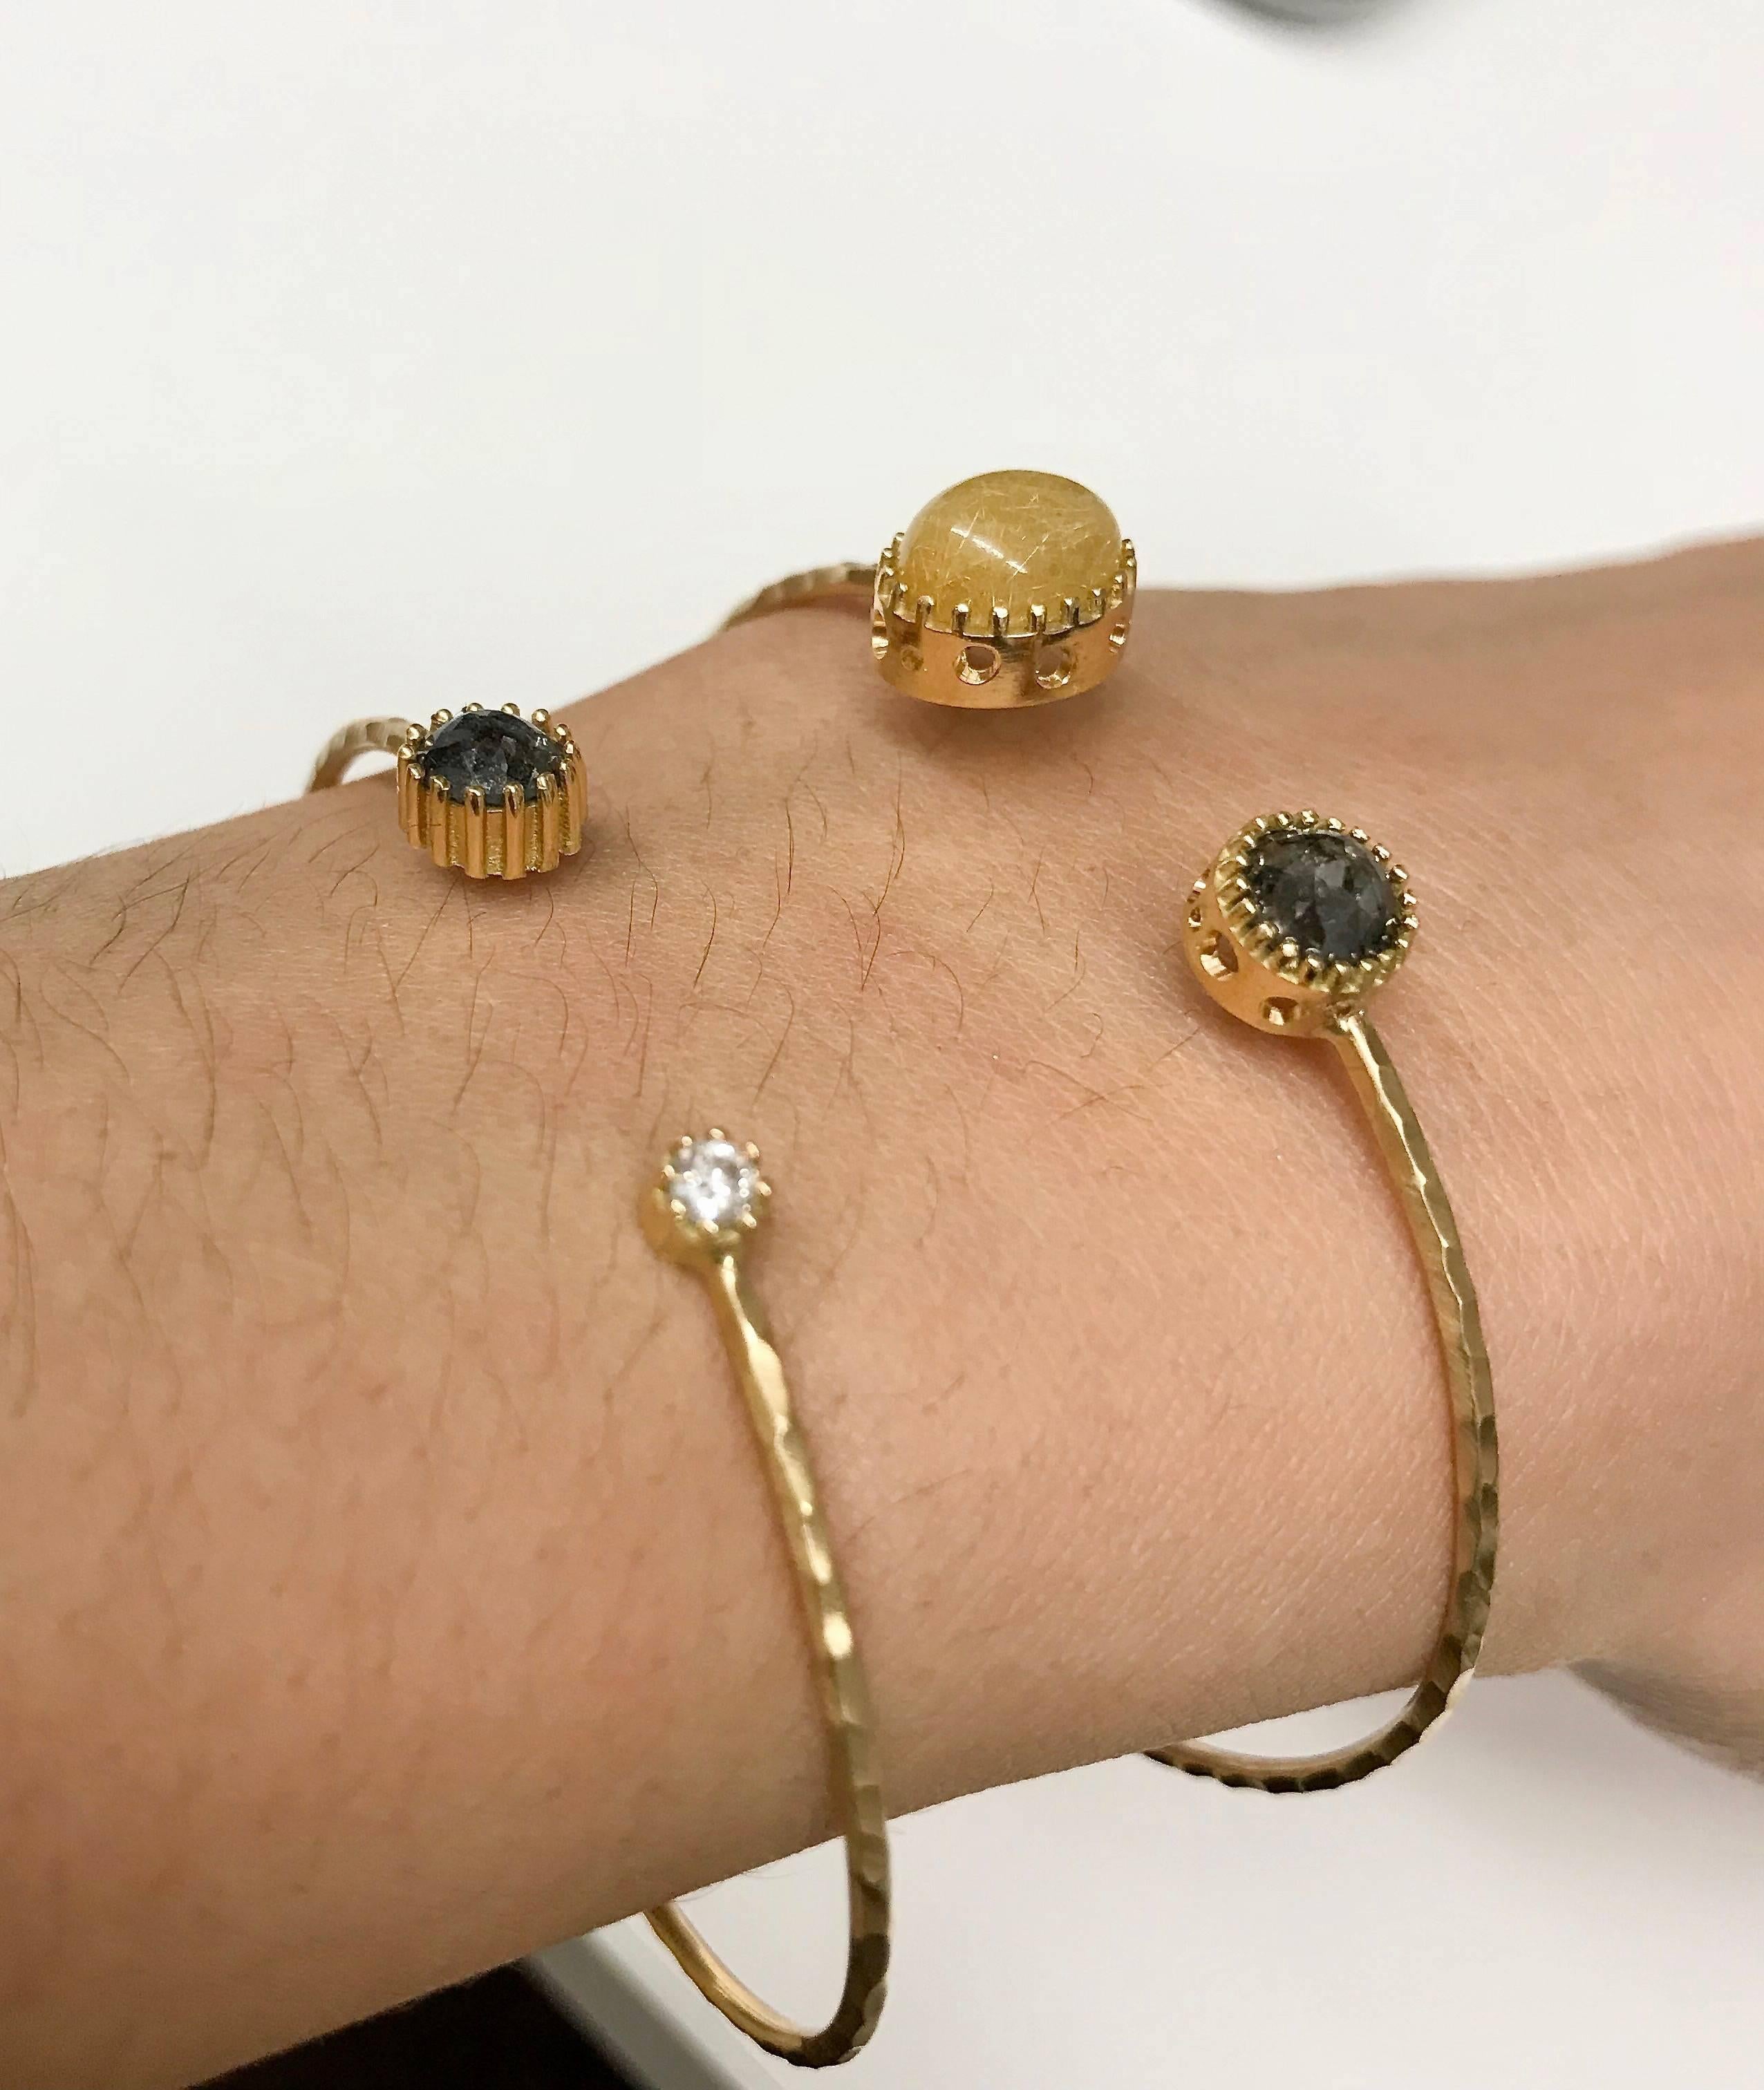 Open cuff with a round rose cut natural-colored black diamond and oval cabochon golden rutilated quartz. The raised settings compliment the stone's shape, exaggerating their height subtly. Oculus openings dotting the exterior of the settings can